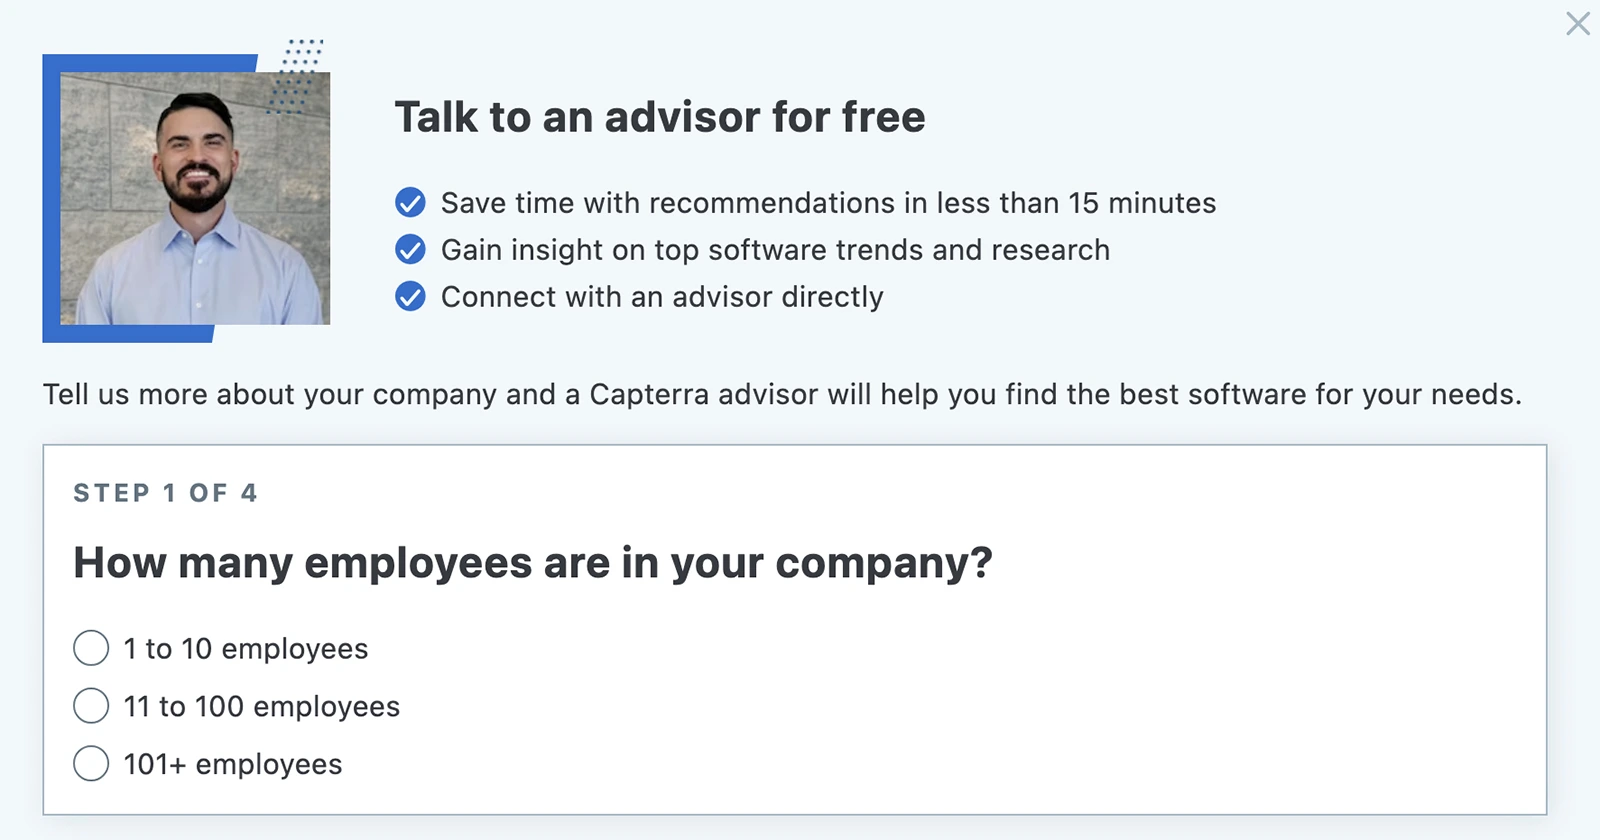 Talk to an advisor for free image